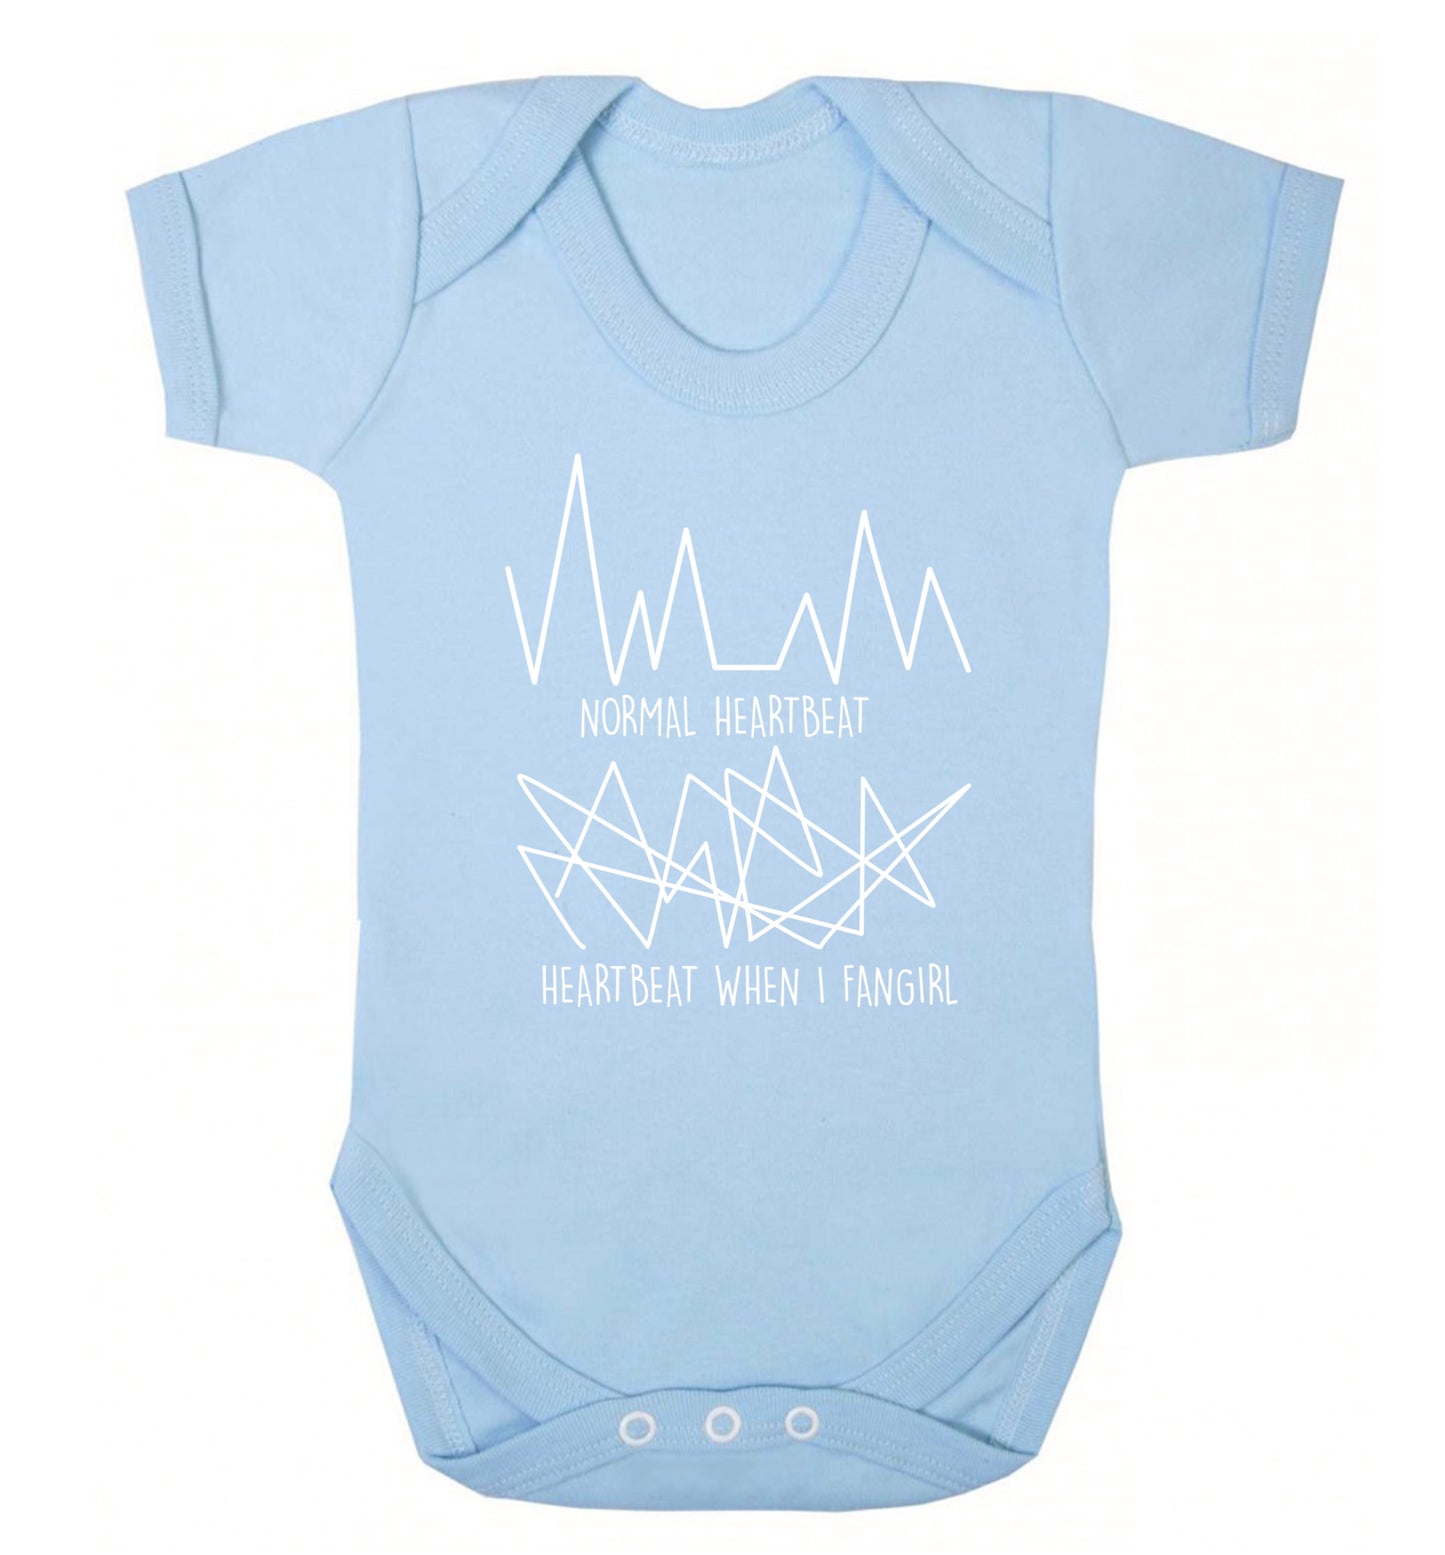 Normal heartbeat heartbeat when I fangirl Baby Vest pale blue 18-24 months